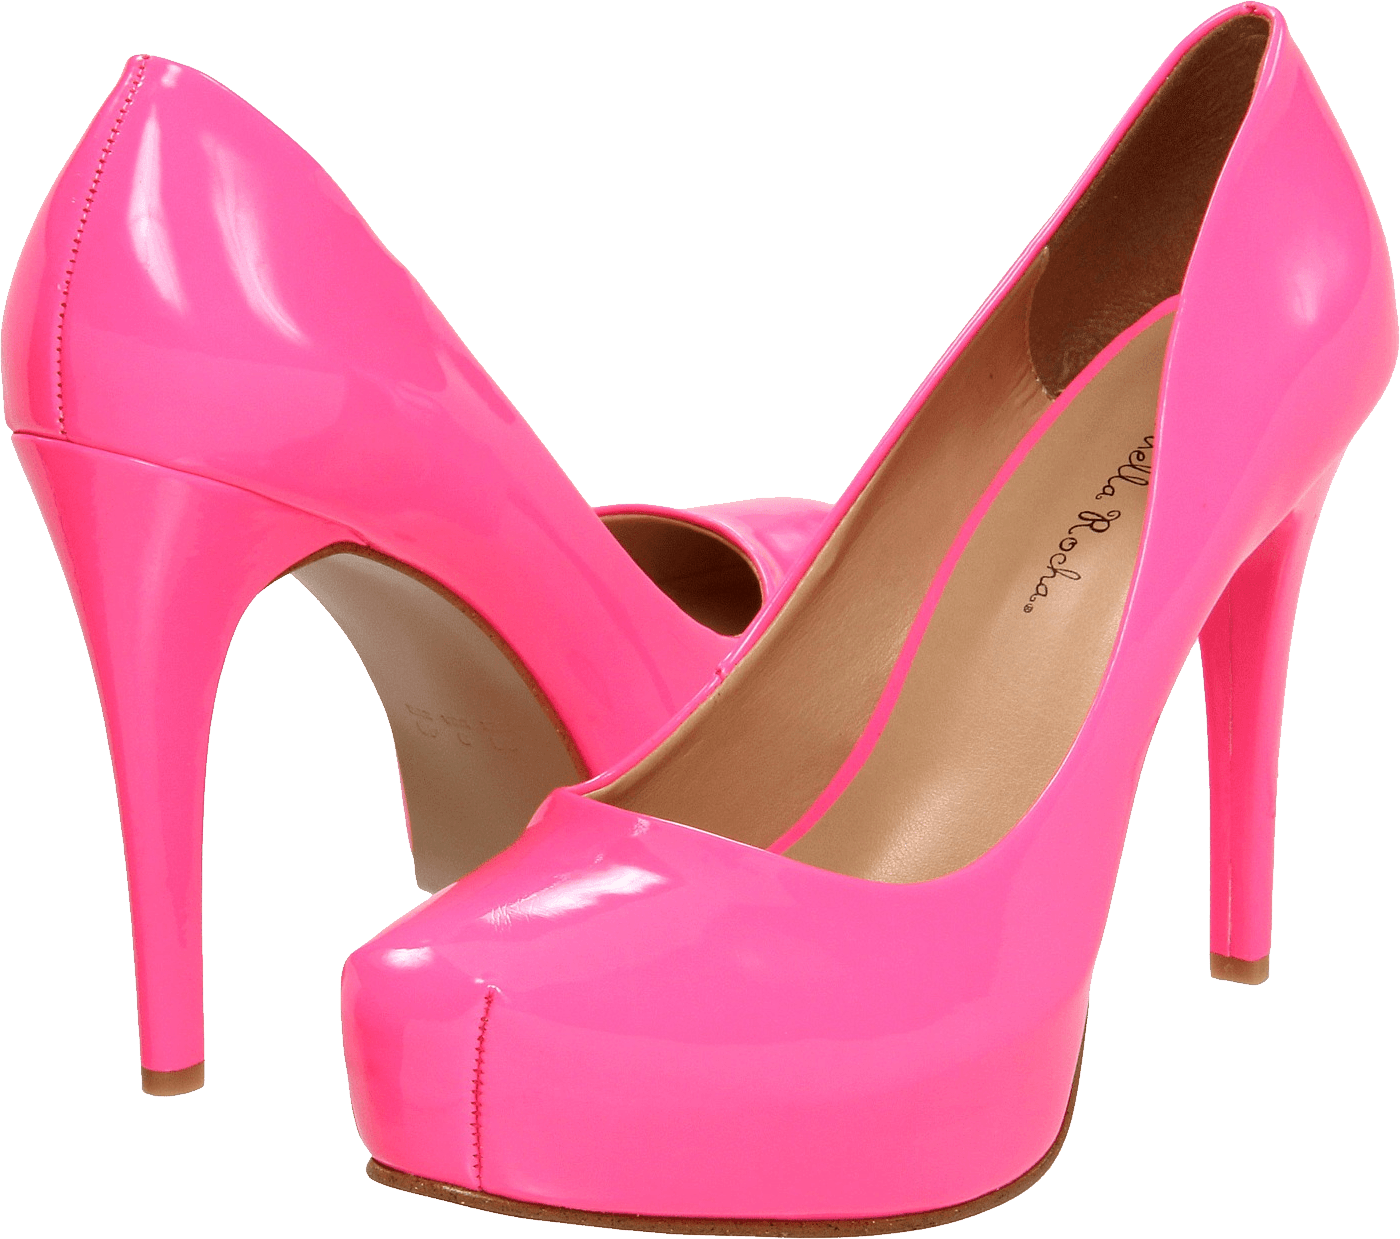 Pink Women Shoes Png Image PNG Image